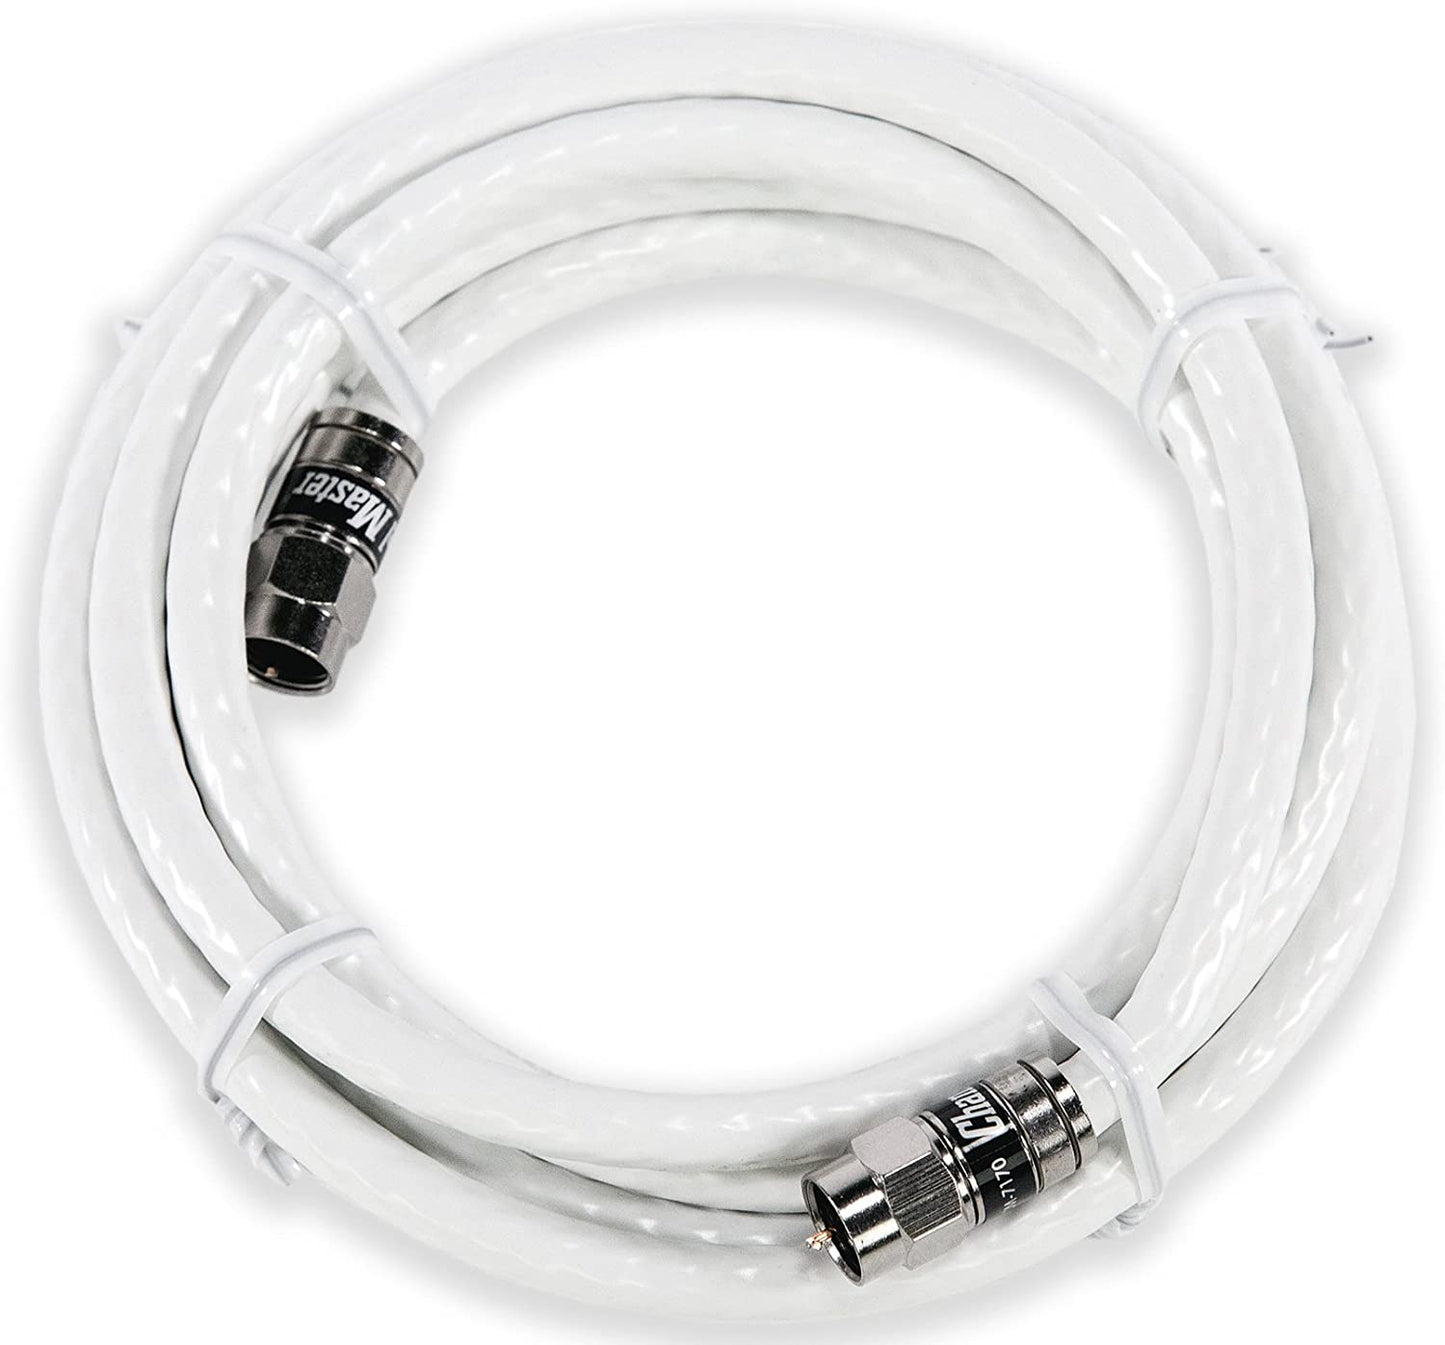 Channel Master CM-3706 Coax Cable, 12 ft RG-6 White w/Compression F Connector